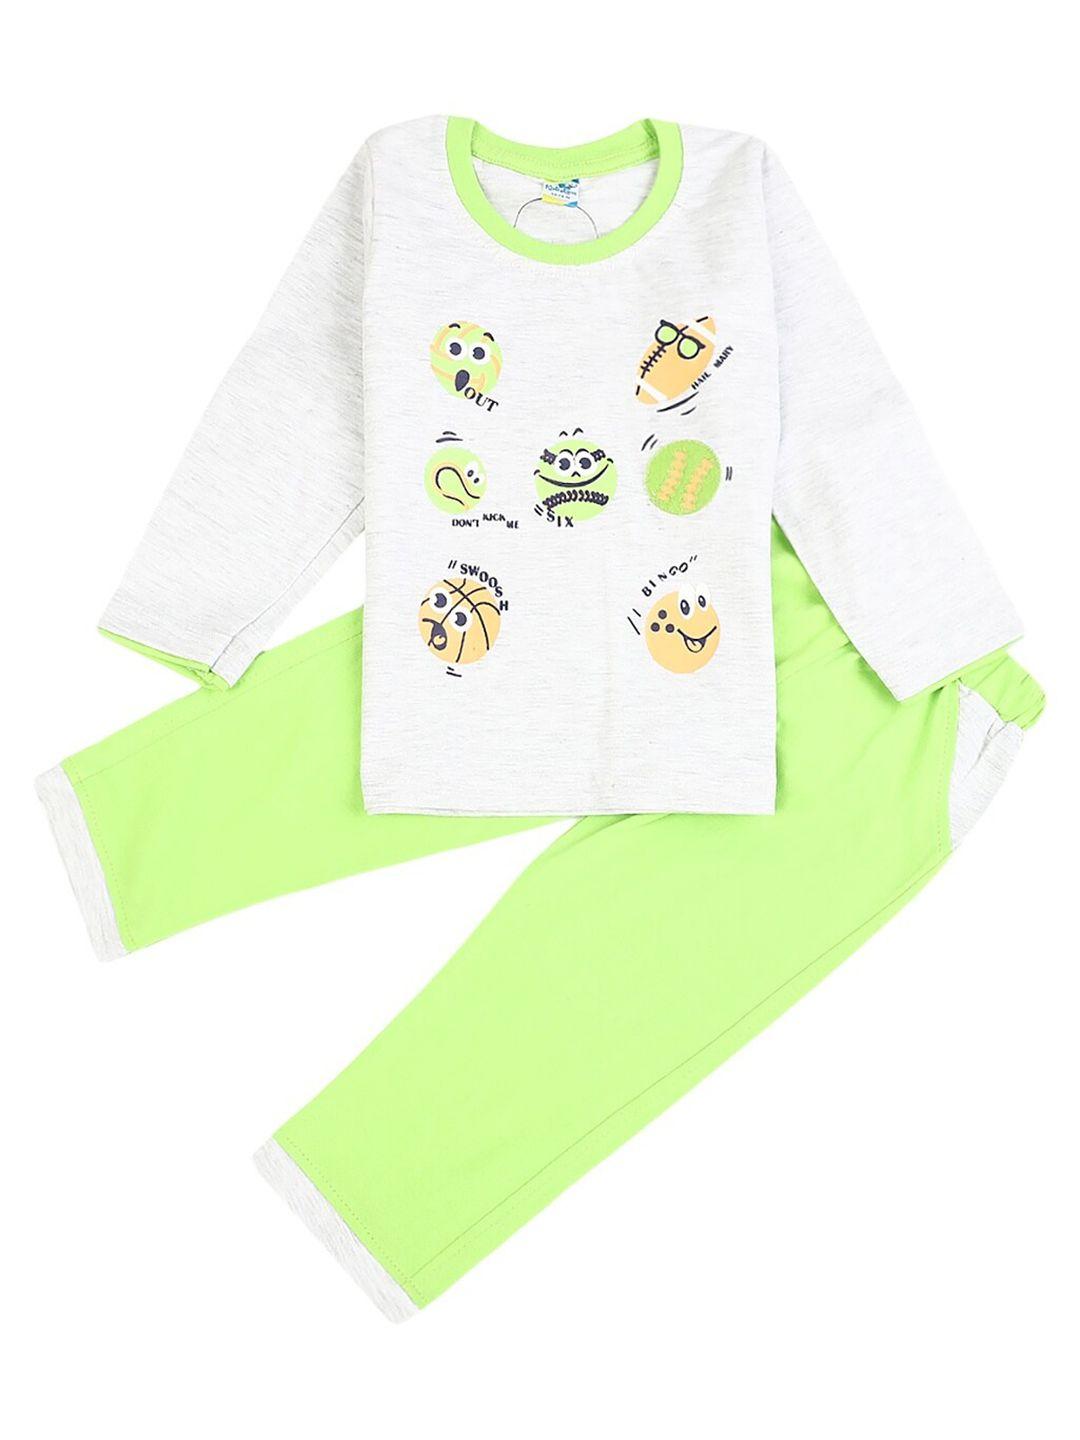 v-mart infant conversational printed pure cotton t-shirt with shorts